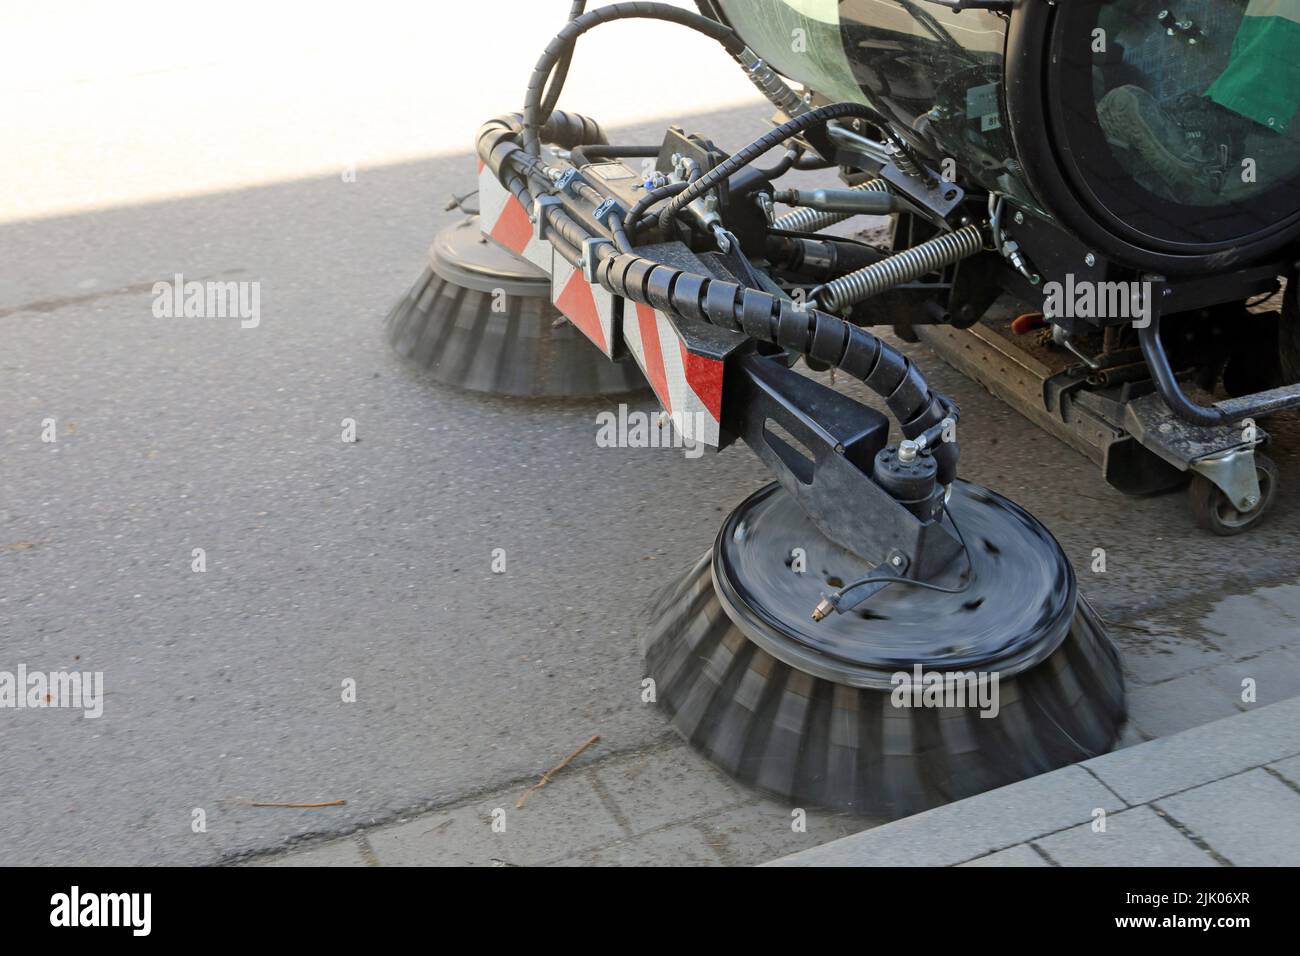 Street cleaning with sweeper Stock Photo